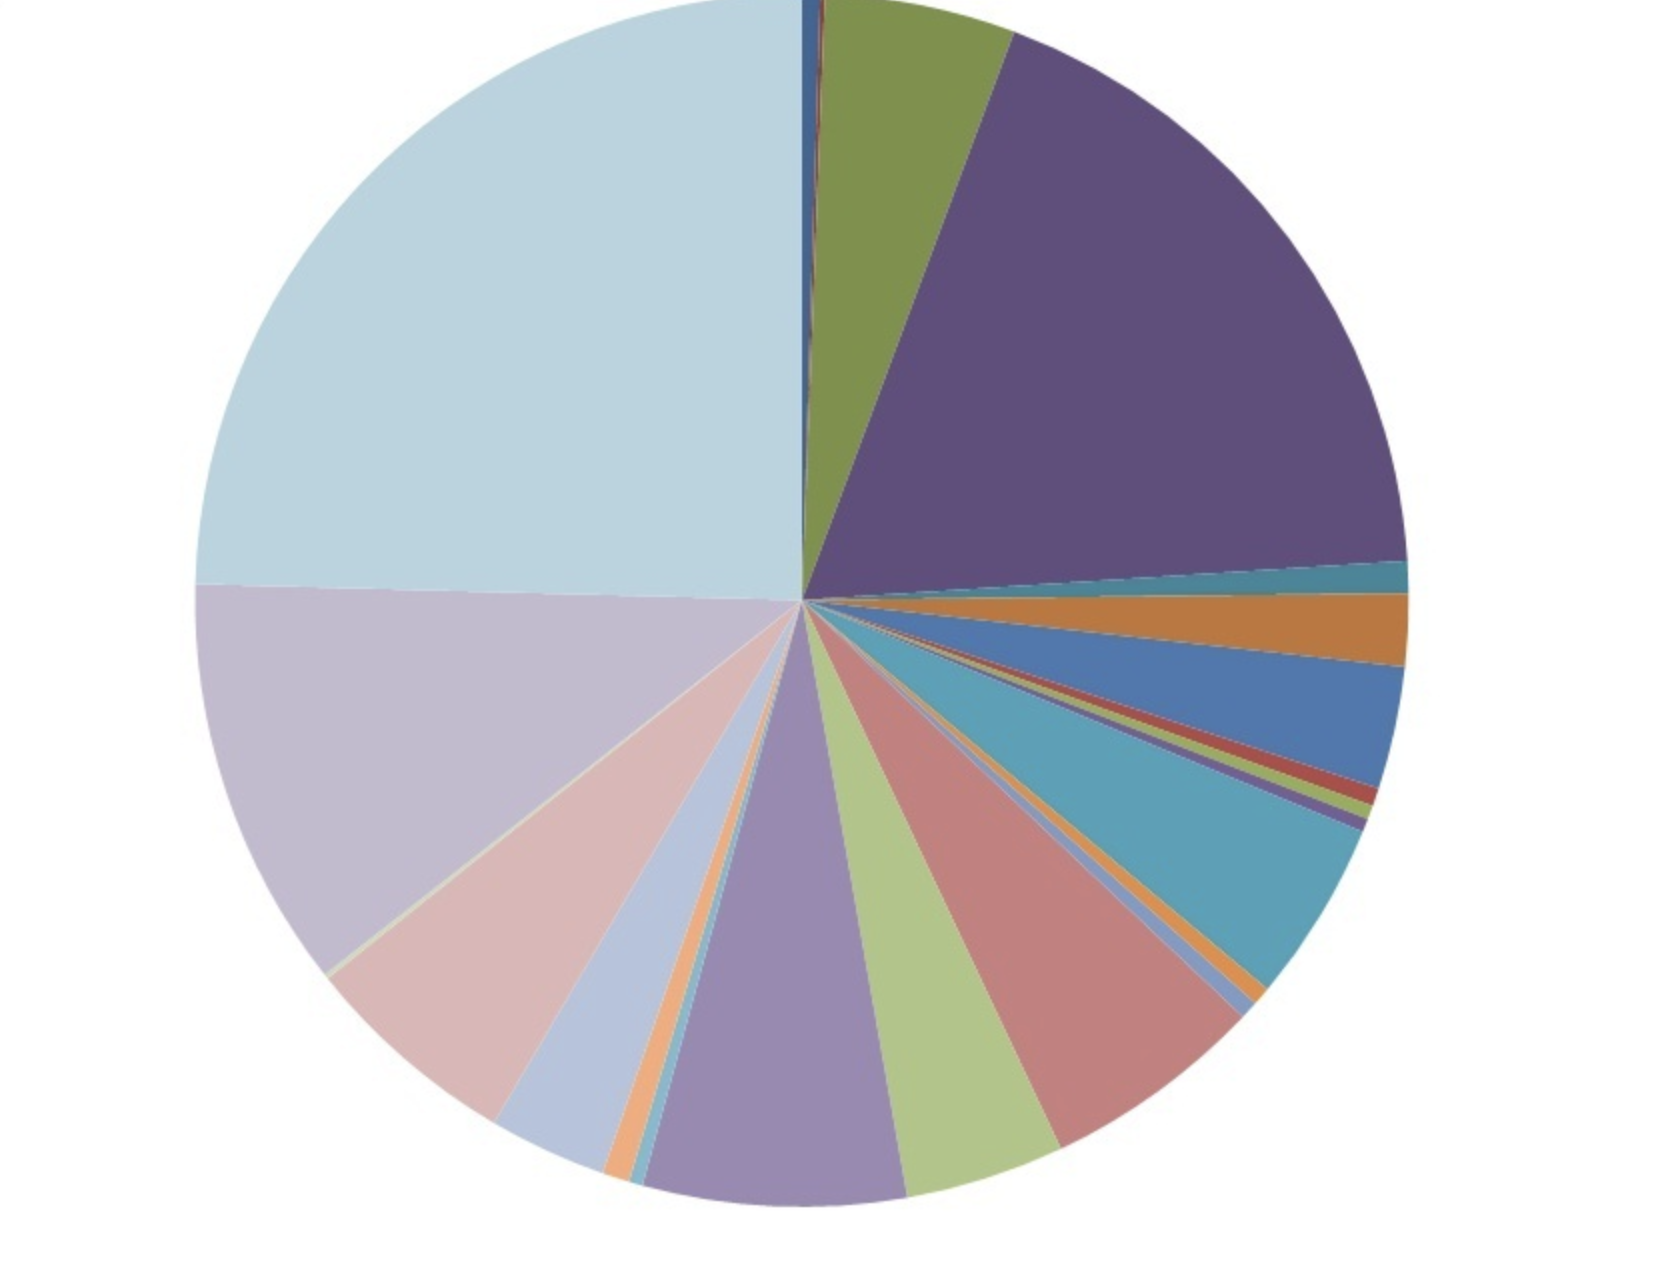 An unlabeled pie chart with blue, green, purple, and orange sections.